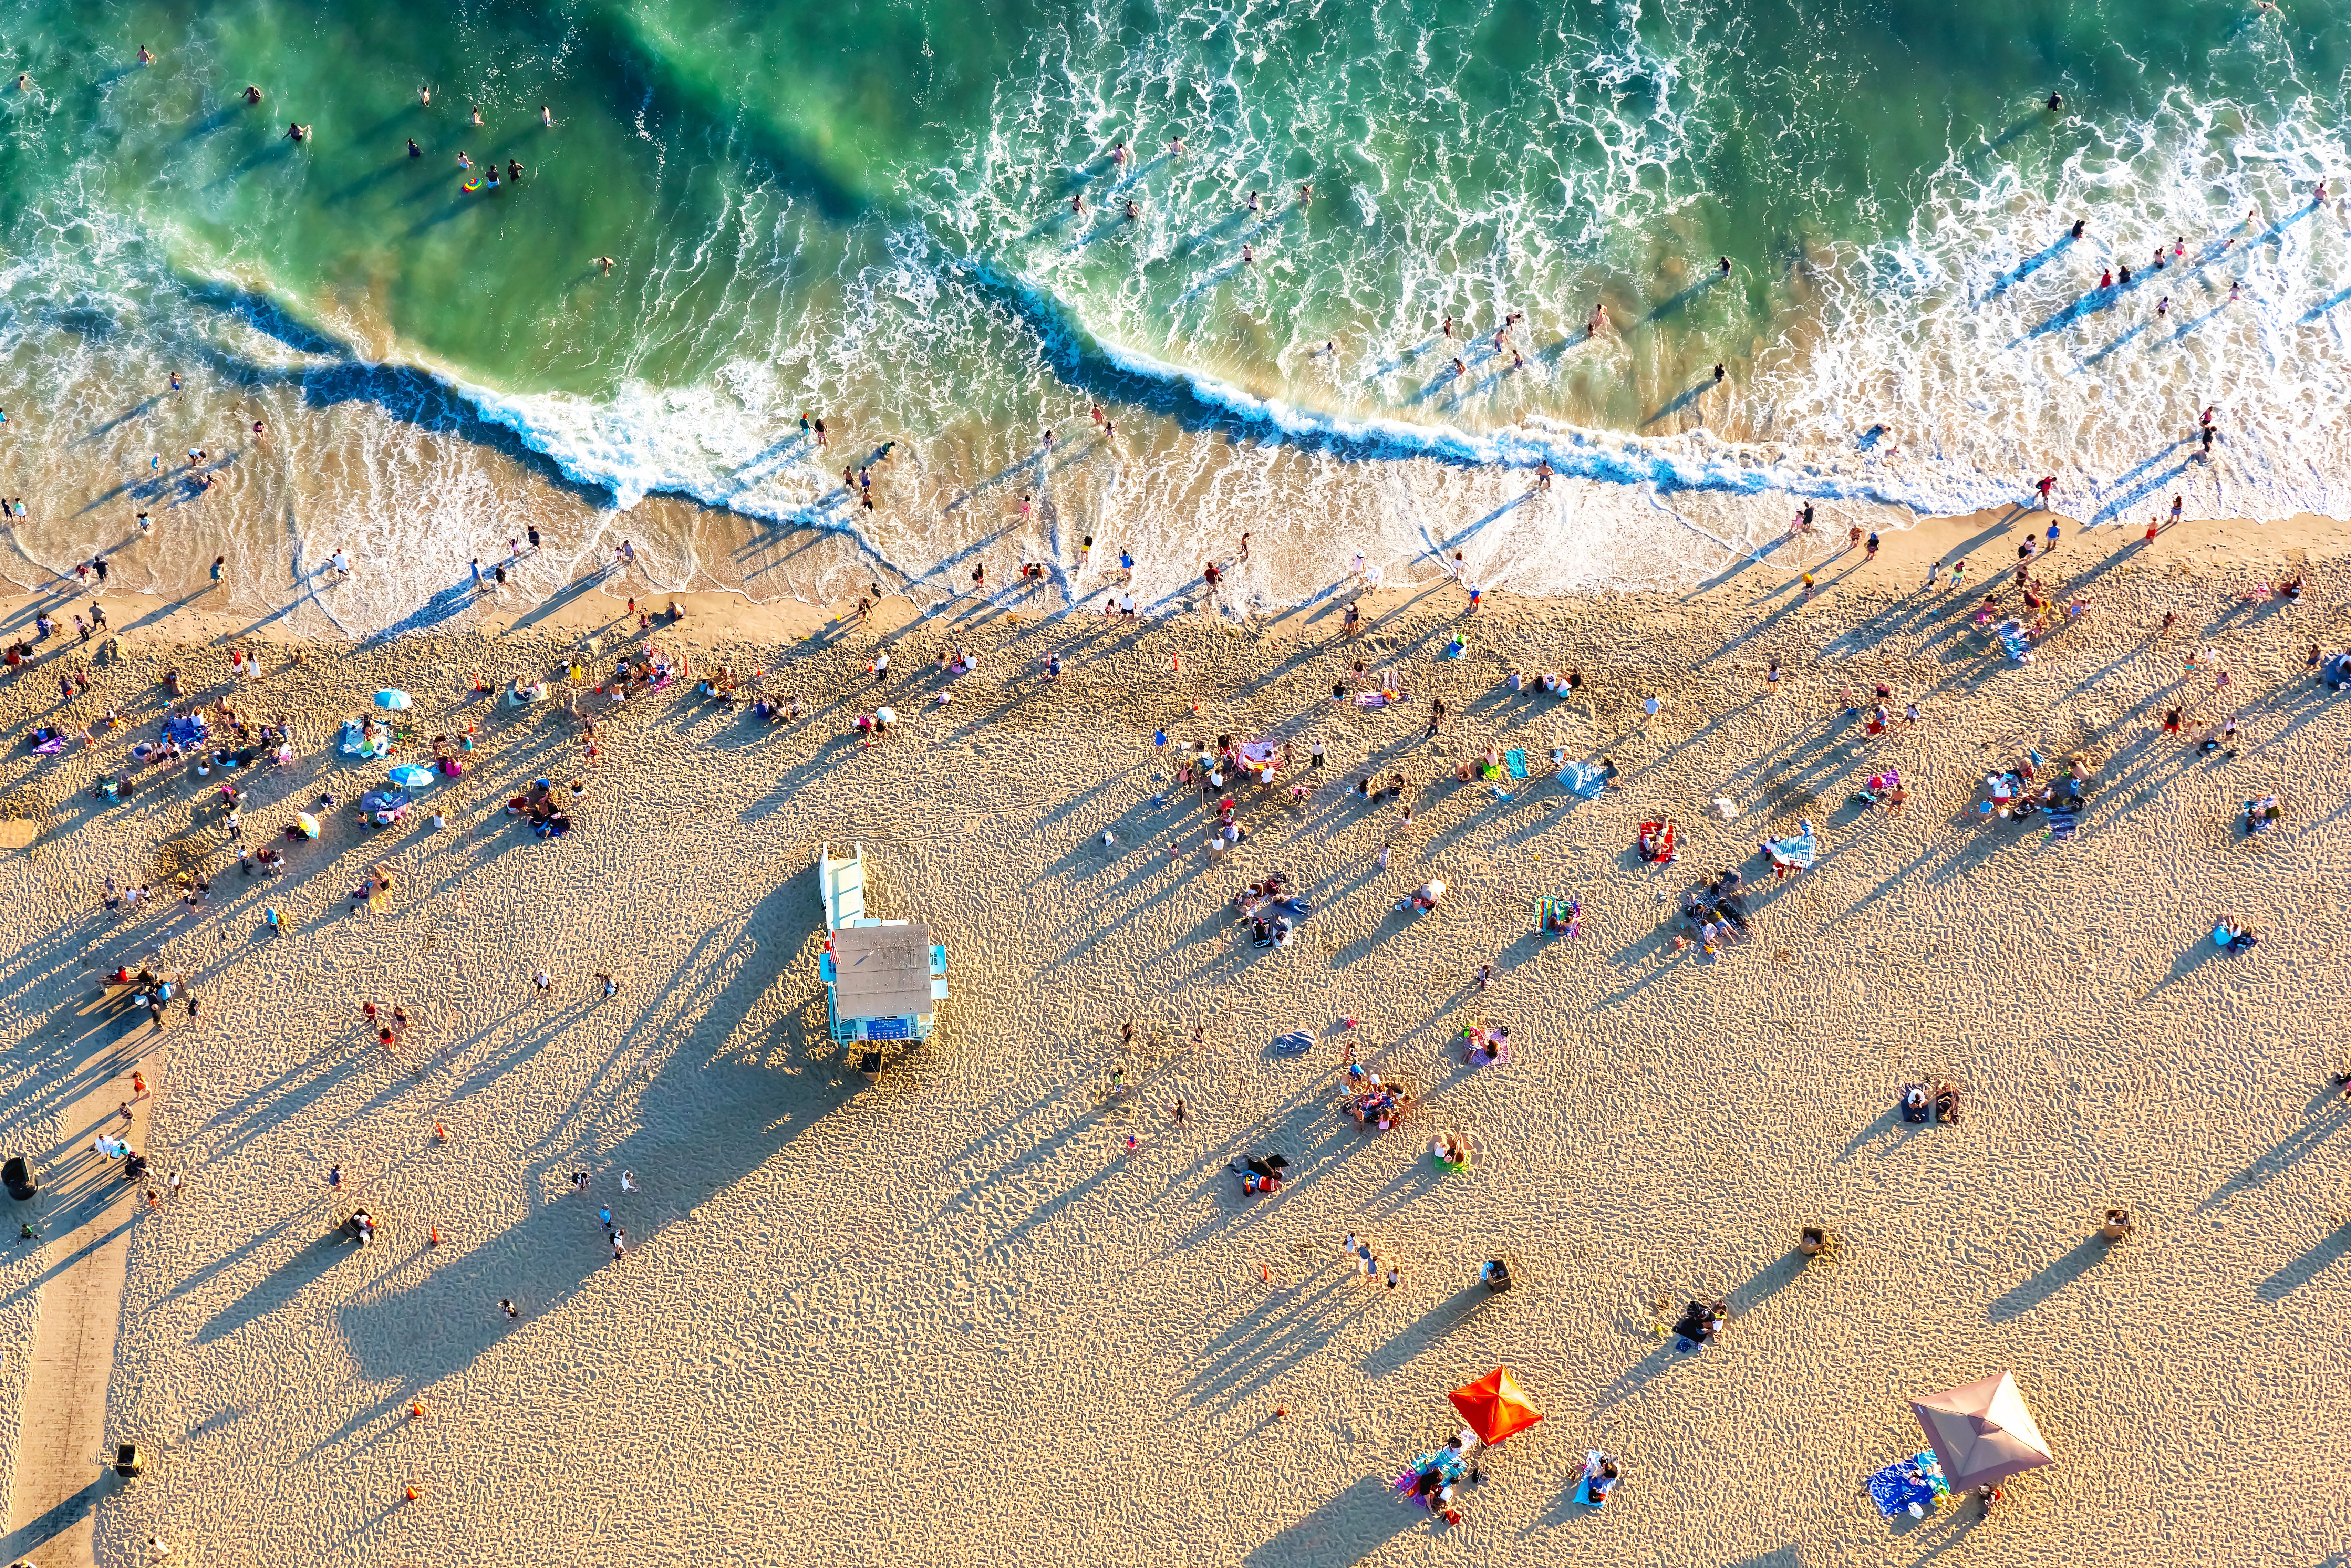 A birdseye view of Santa Monica Beach in LA with pedestrians, sunbathers, and swimmers on the sands